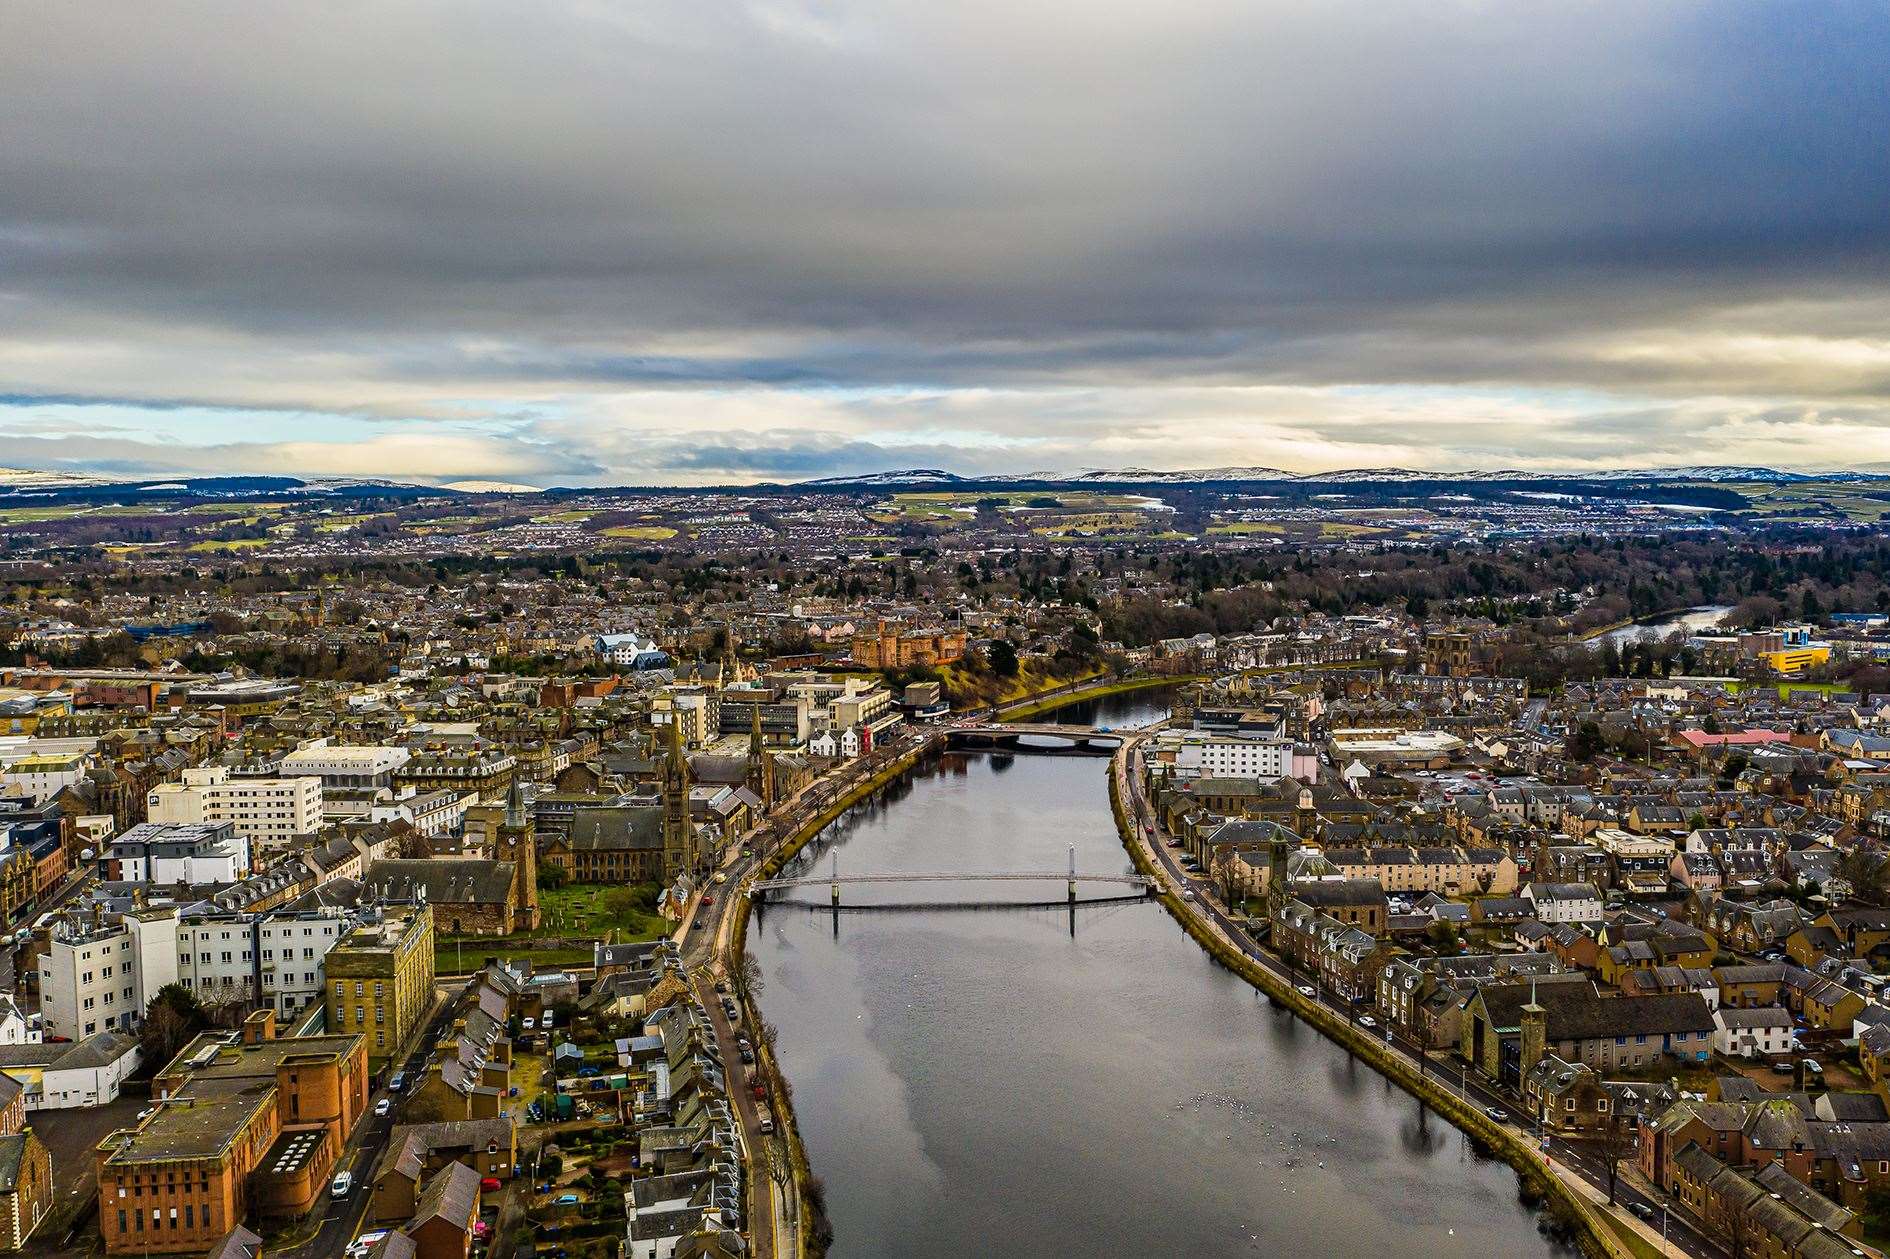 The Inverness Futures group believes that Inverness needs a distinct vision if it wants to realise its potential as a modern city. Picture: Scott MacDonald / Flying Scotsman UAS